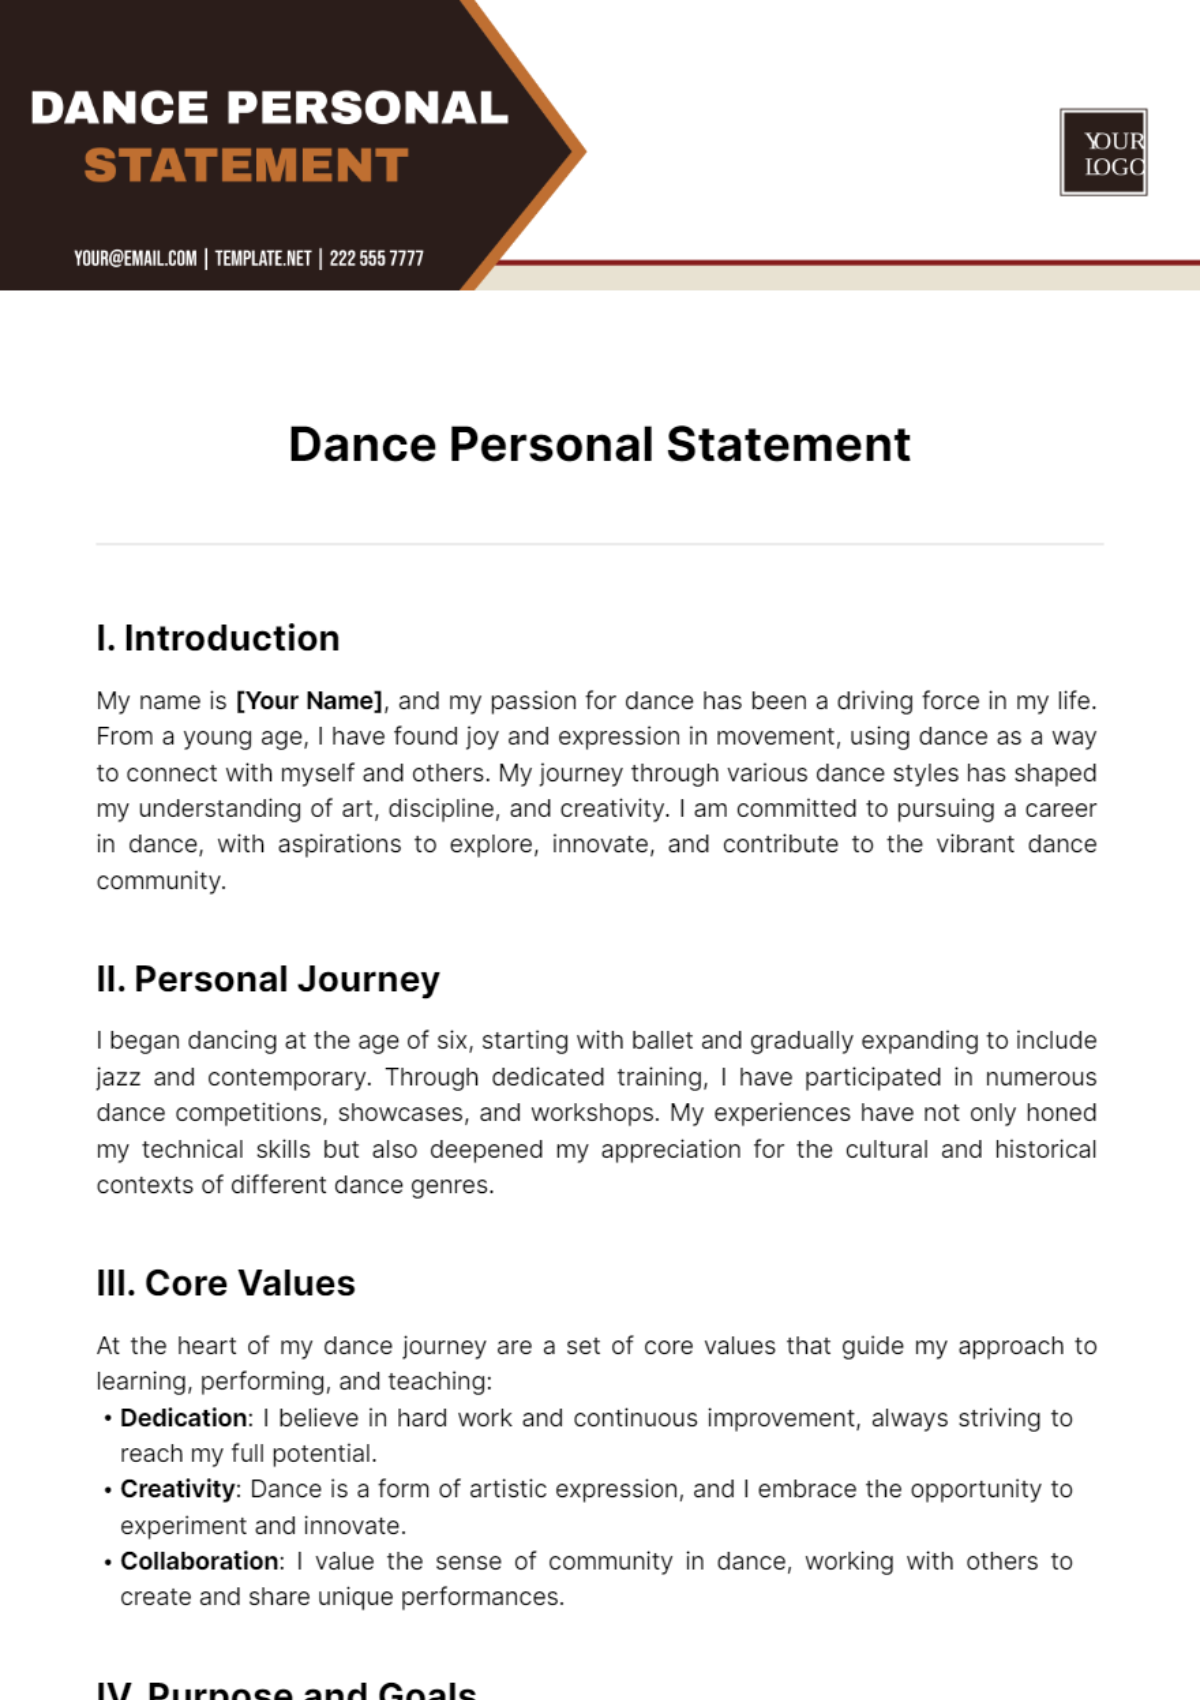 Dance Personal Statement Template